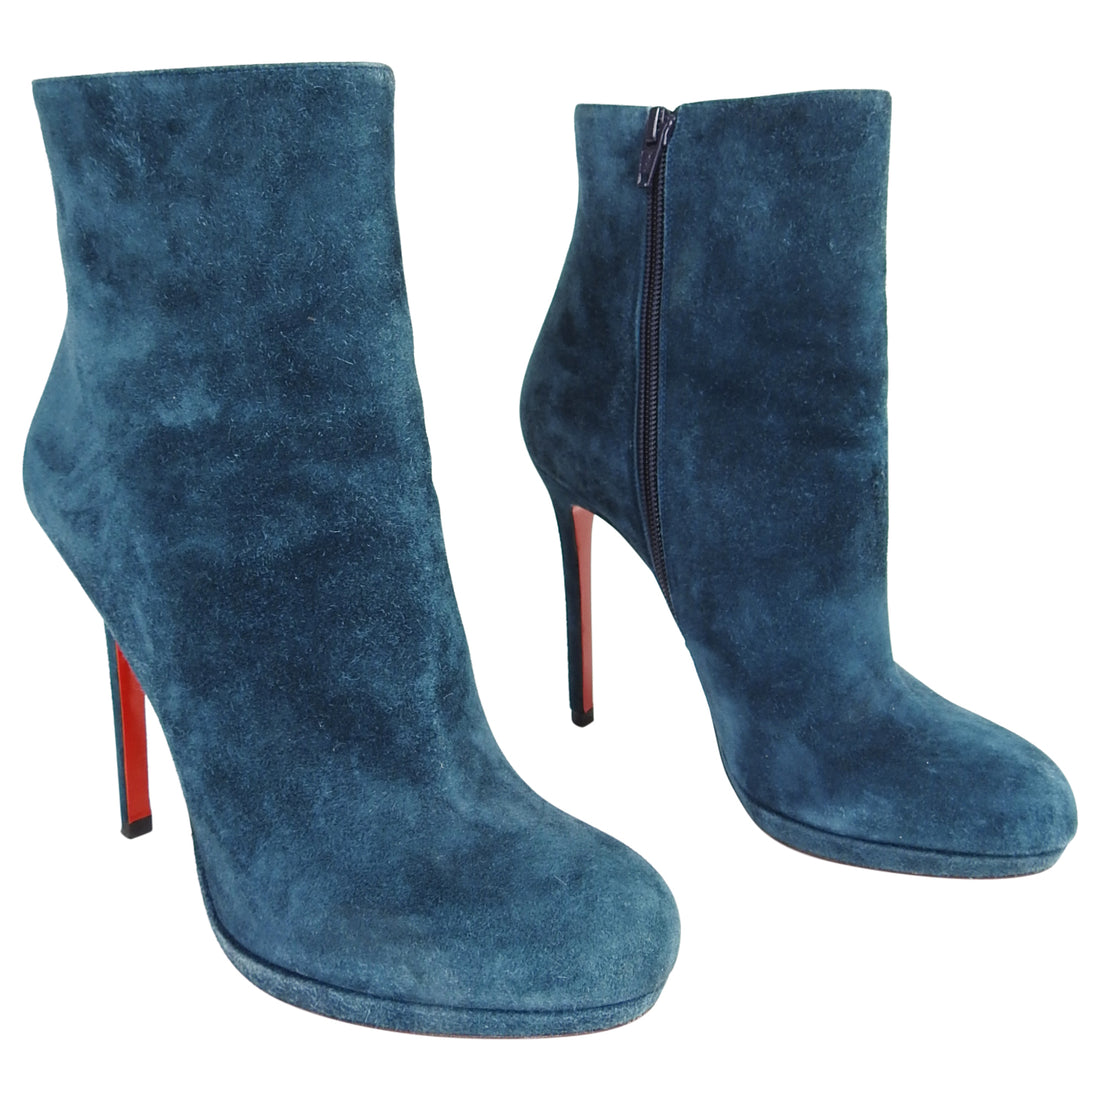 Christian Louboutin Teal Blue Suede High Heel Ankle Boots - 40 / 9.5